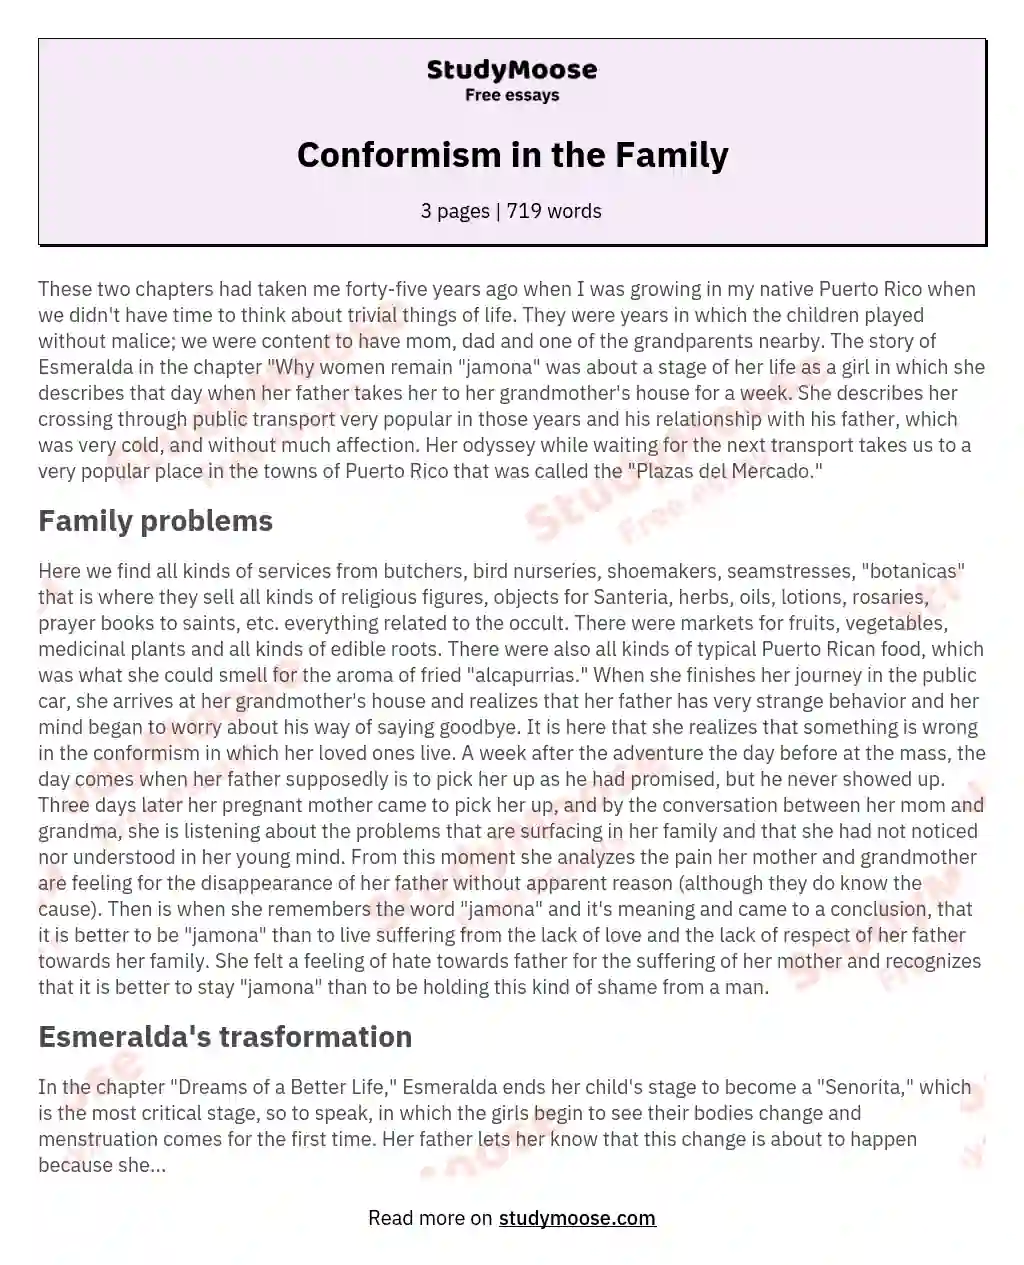 Conformism in the Family essay